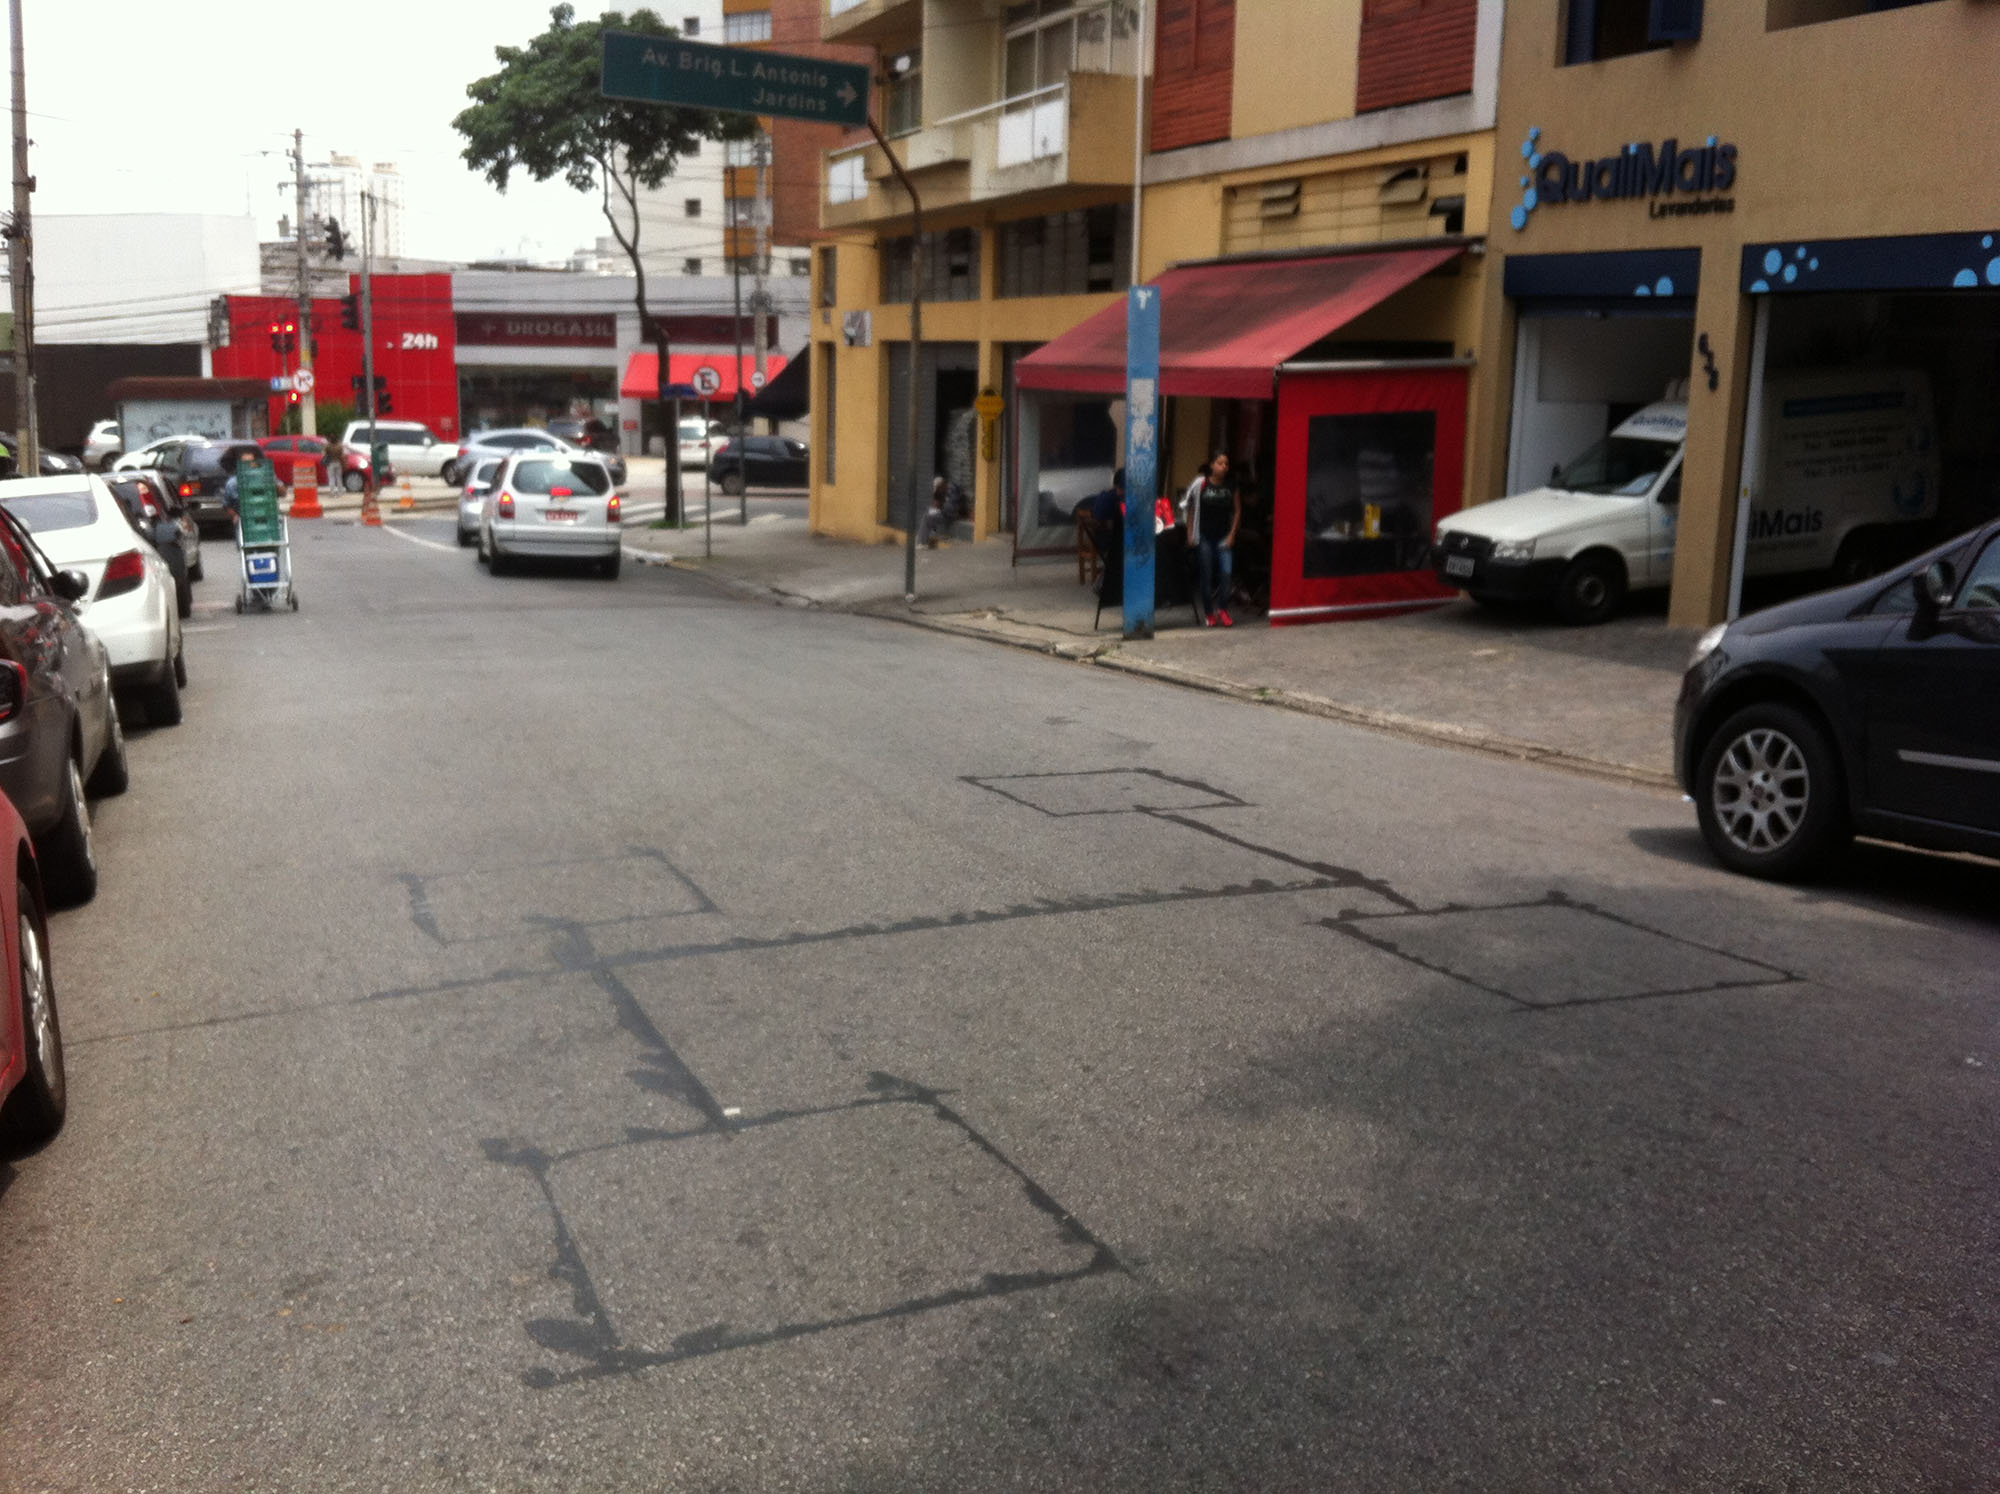 Fig. 24.10 To feed São Paulo’s central traffic control, vehicles’ metallic surfaces are detected when approaching an intersection.